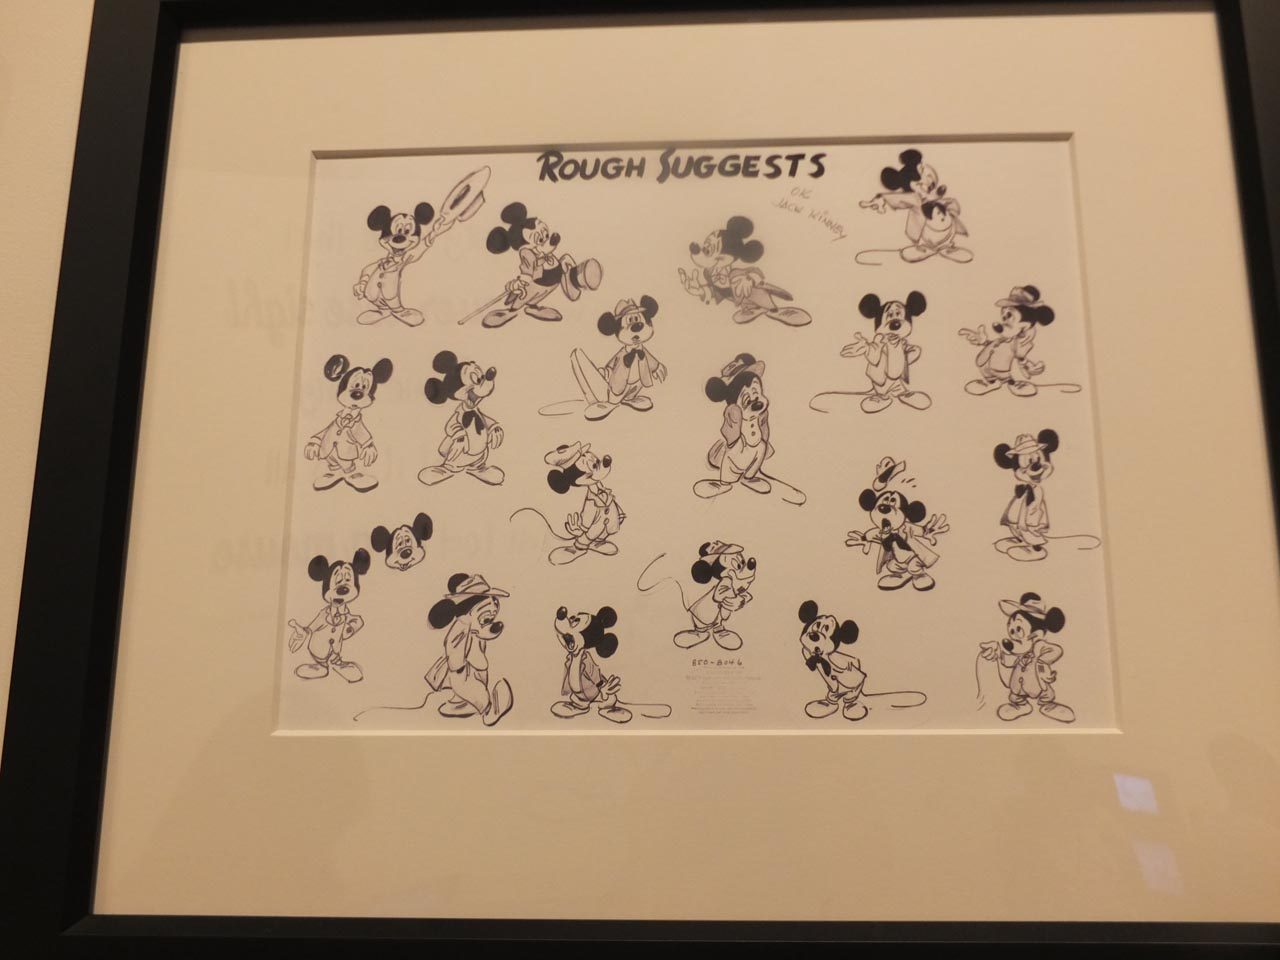 ROUGH SUGGESTS. Sketches of Mickey from the animation of 'Rough Suggests.' 